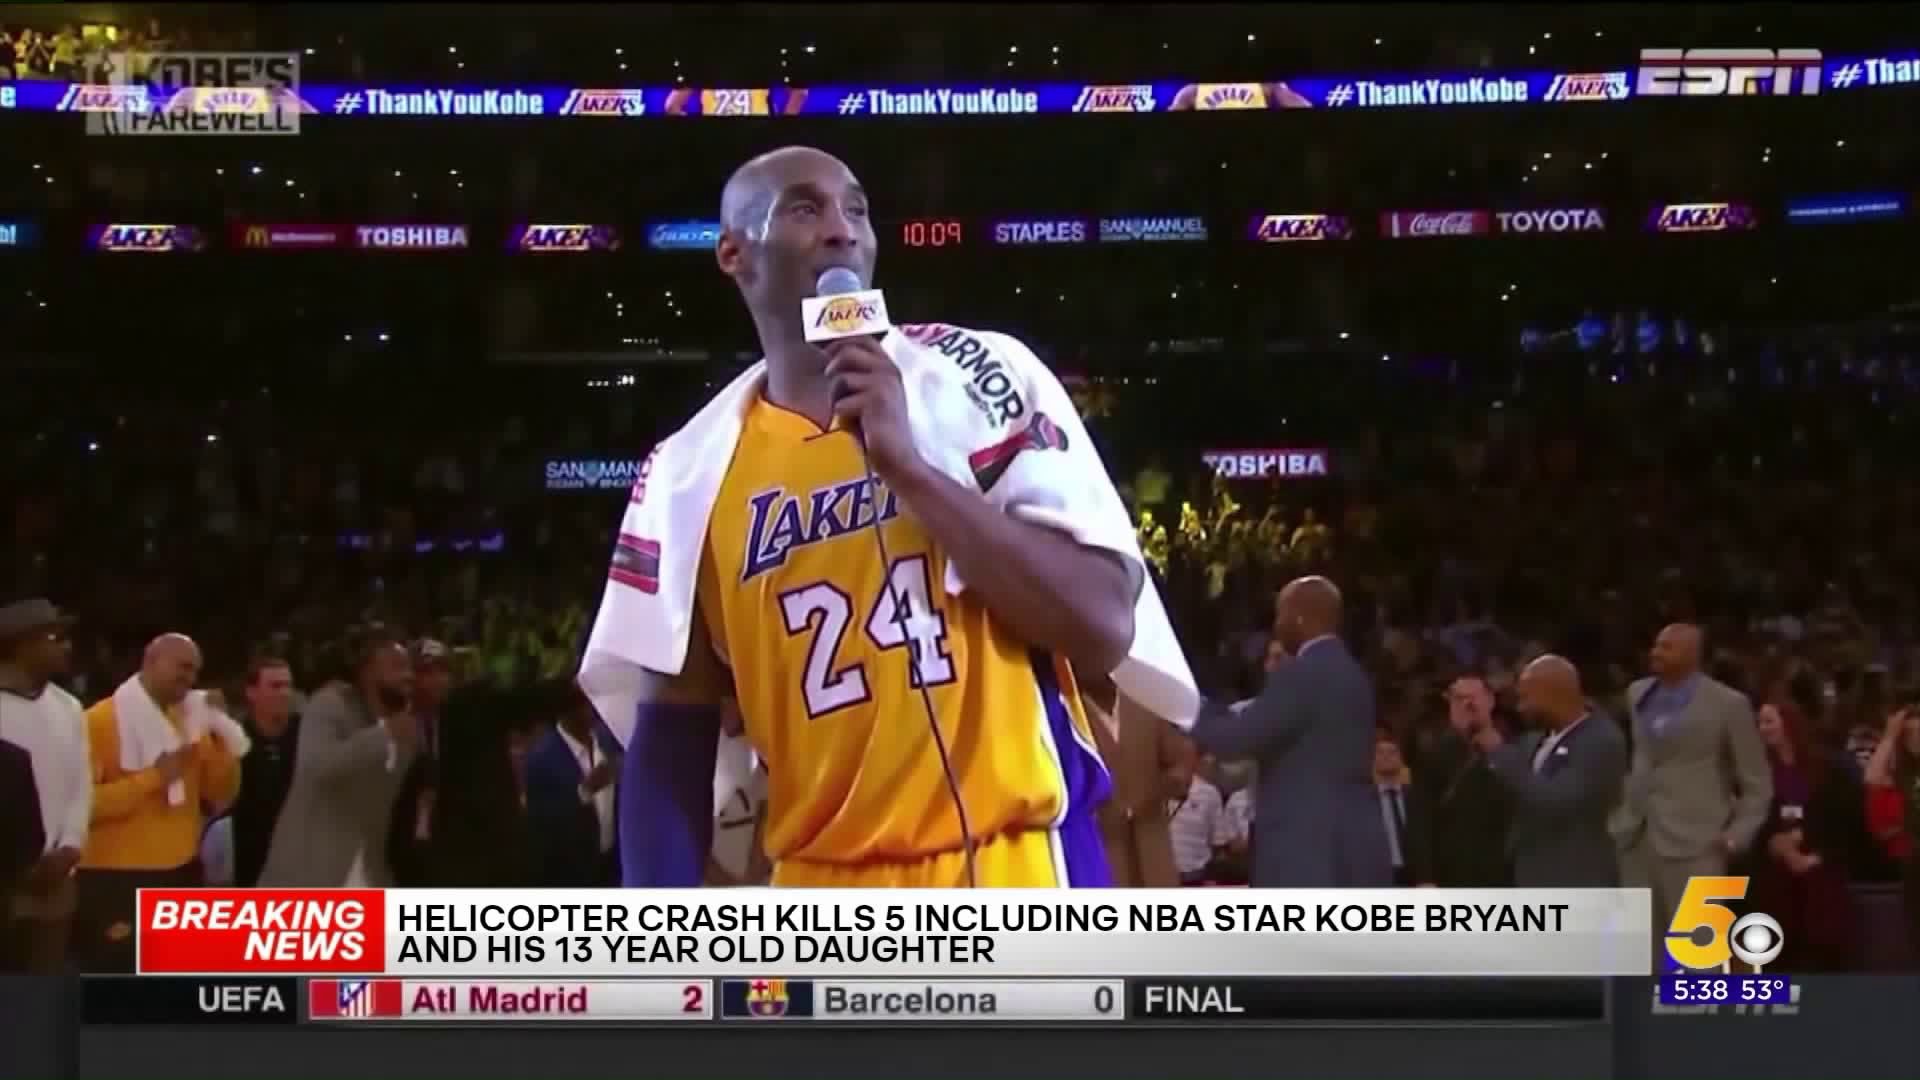 An emotional Trae Young honors Kobe Bryant with jersey number switch